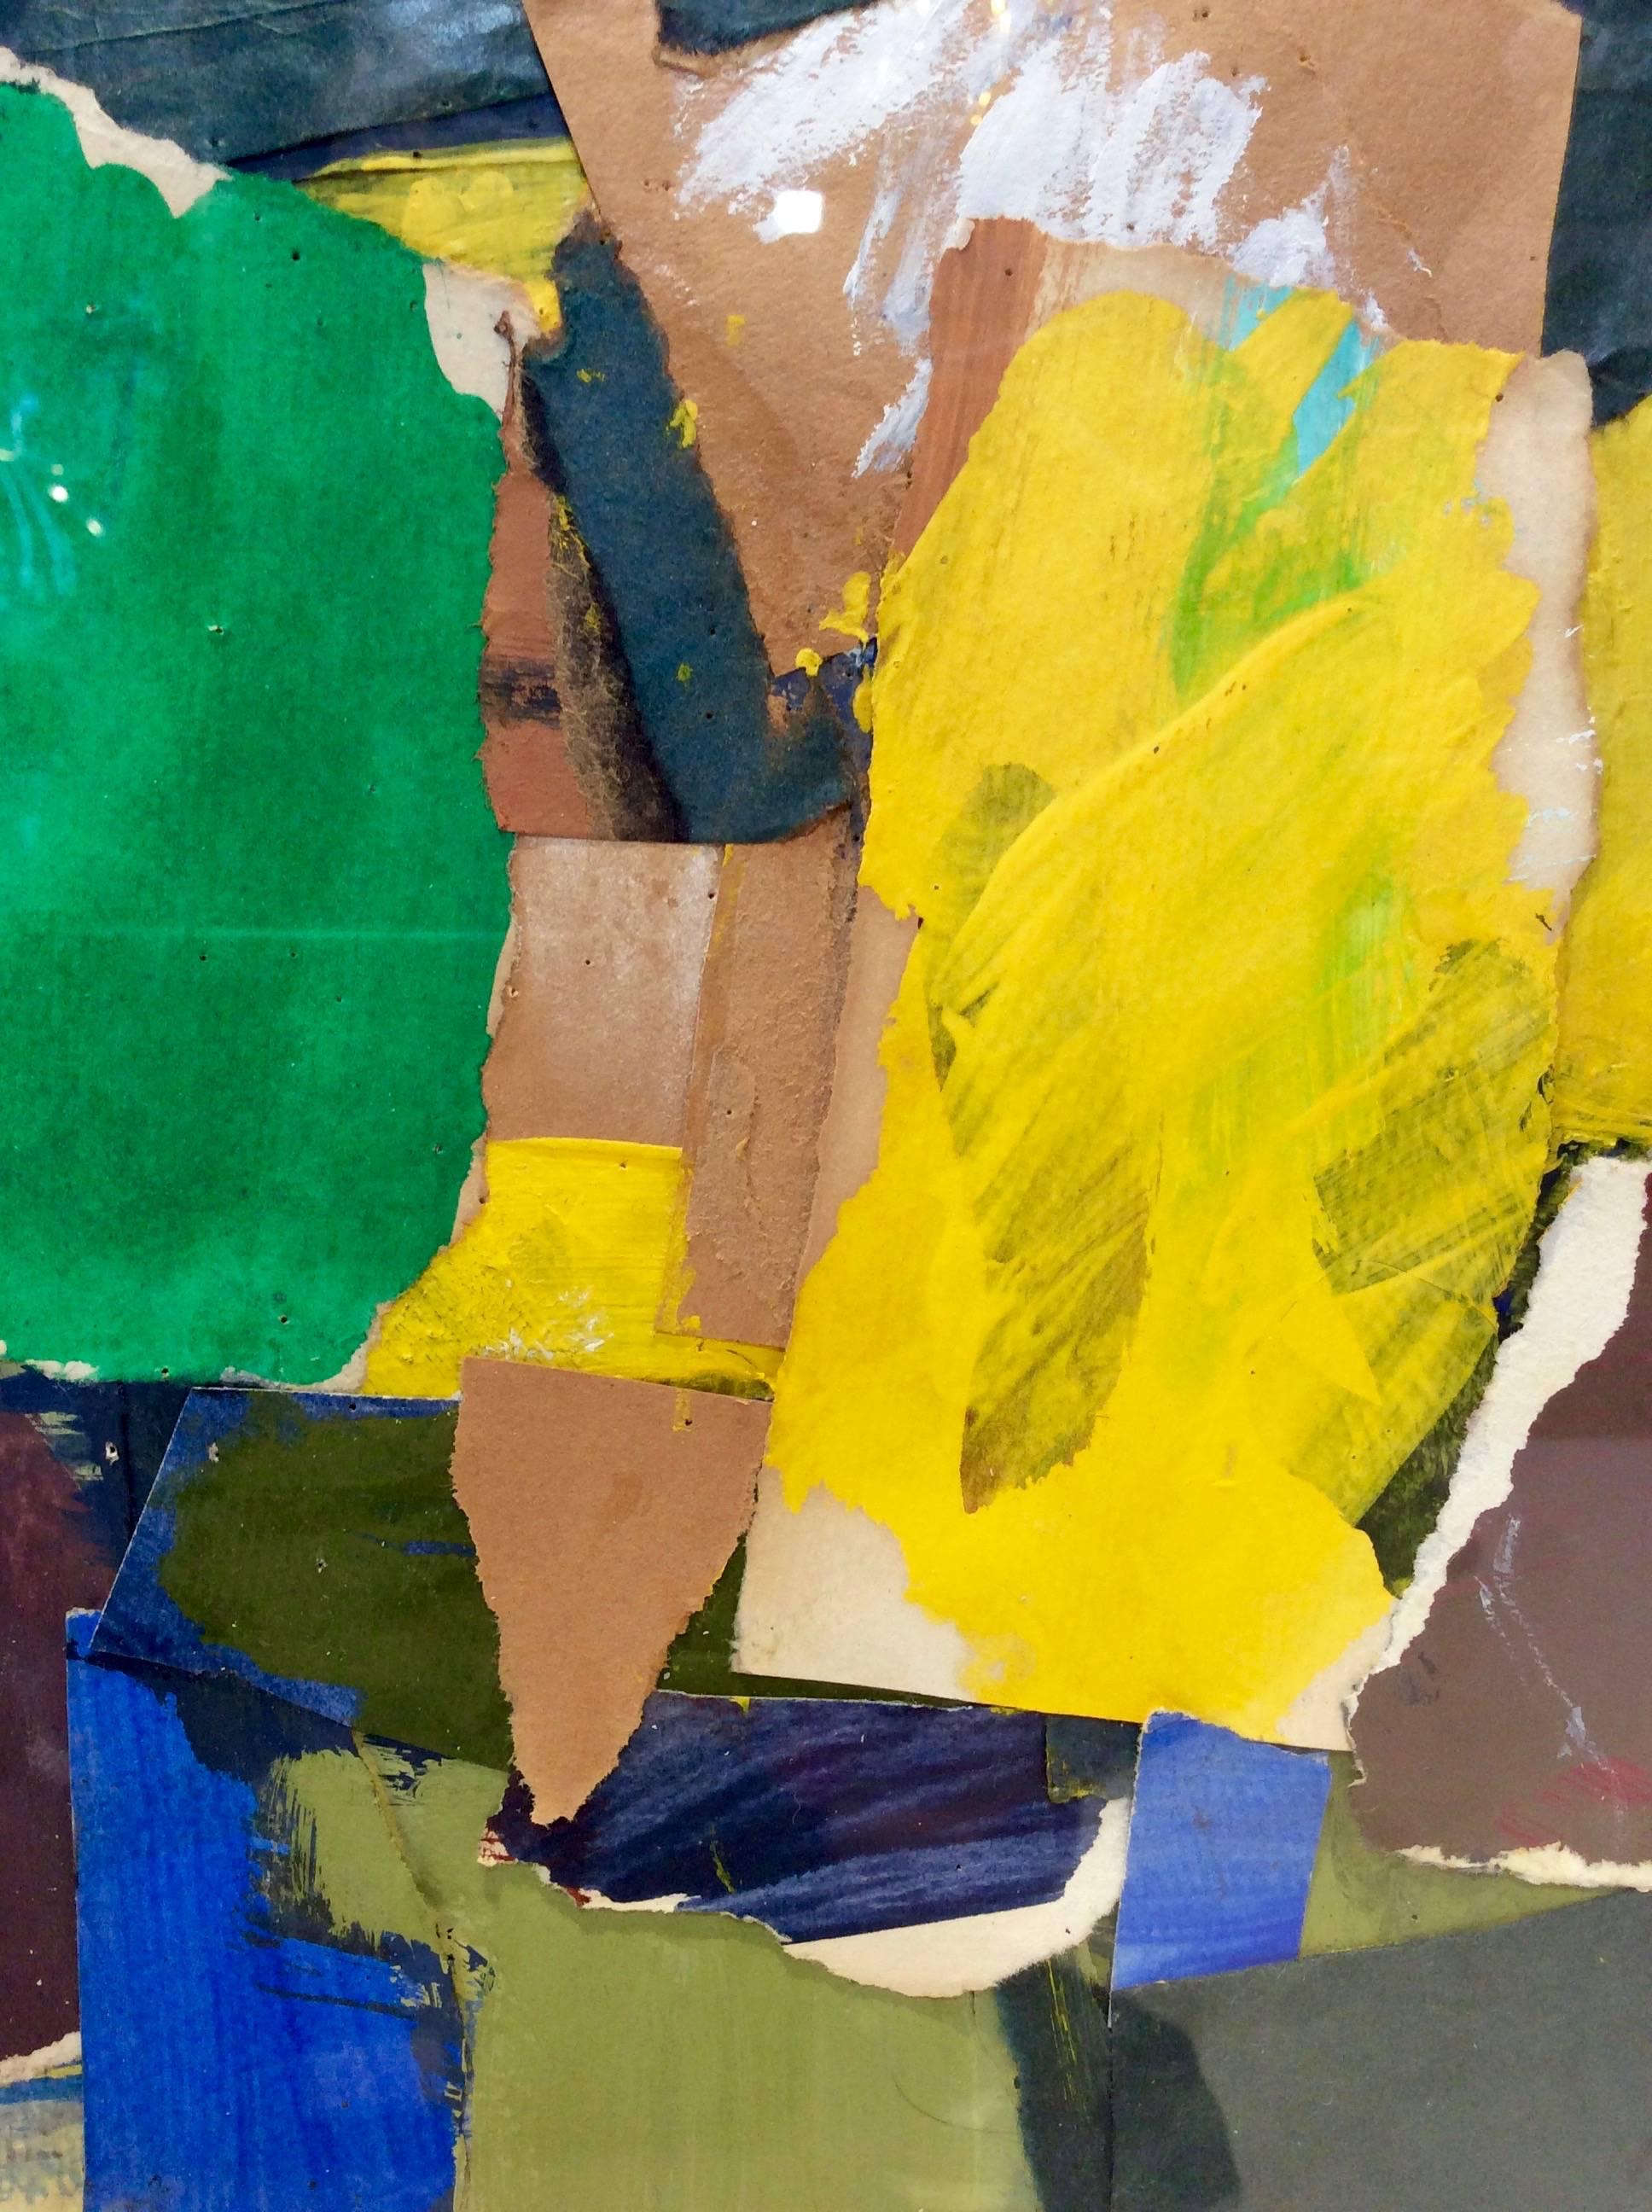 Fantastic jewel toned mixed media collage, signed by Artist Jacklyn Friedman. Assembled with multiple layers of paint and paper, giving this work a strong graphic abstract presence. The piece is floating on a linen mat background and highlighted in